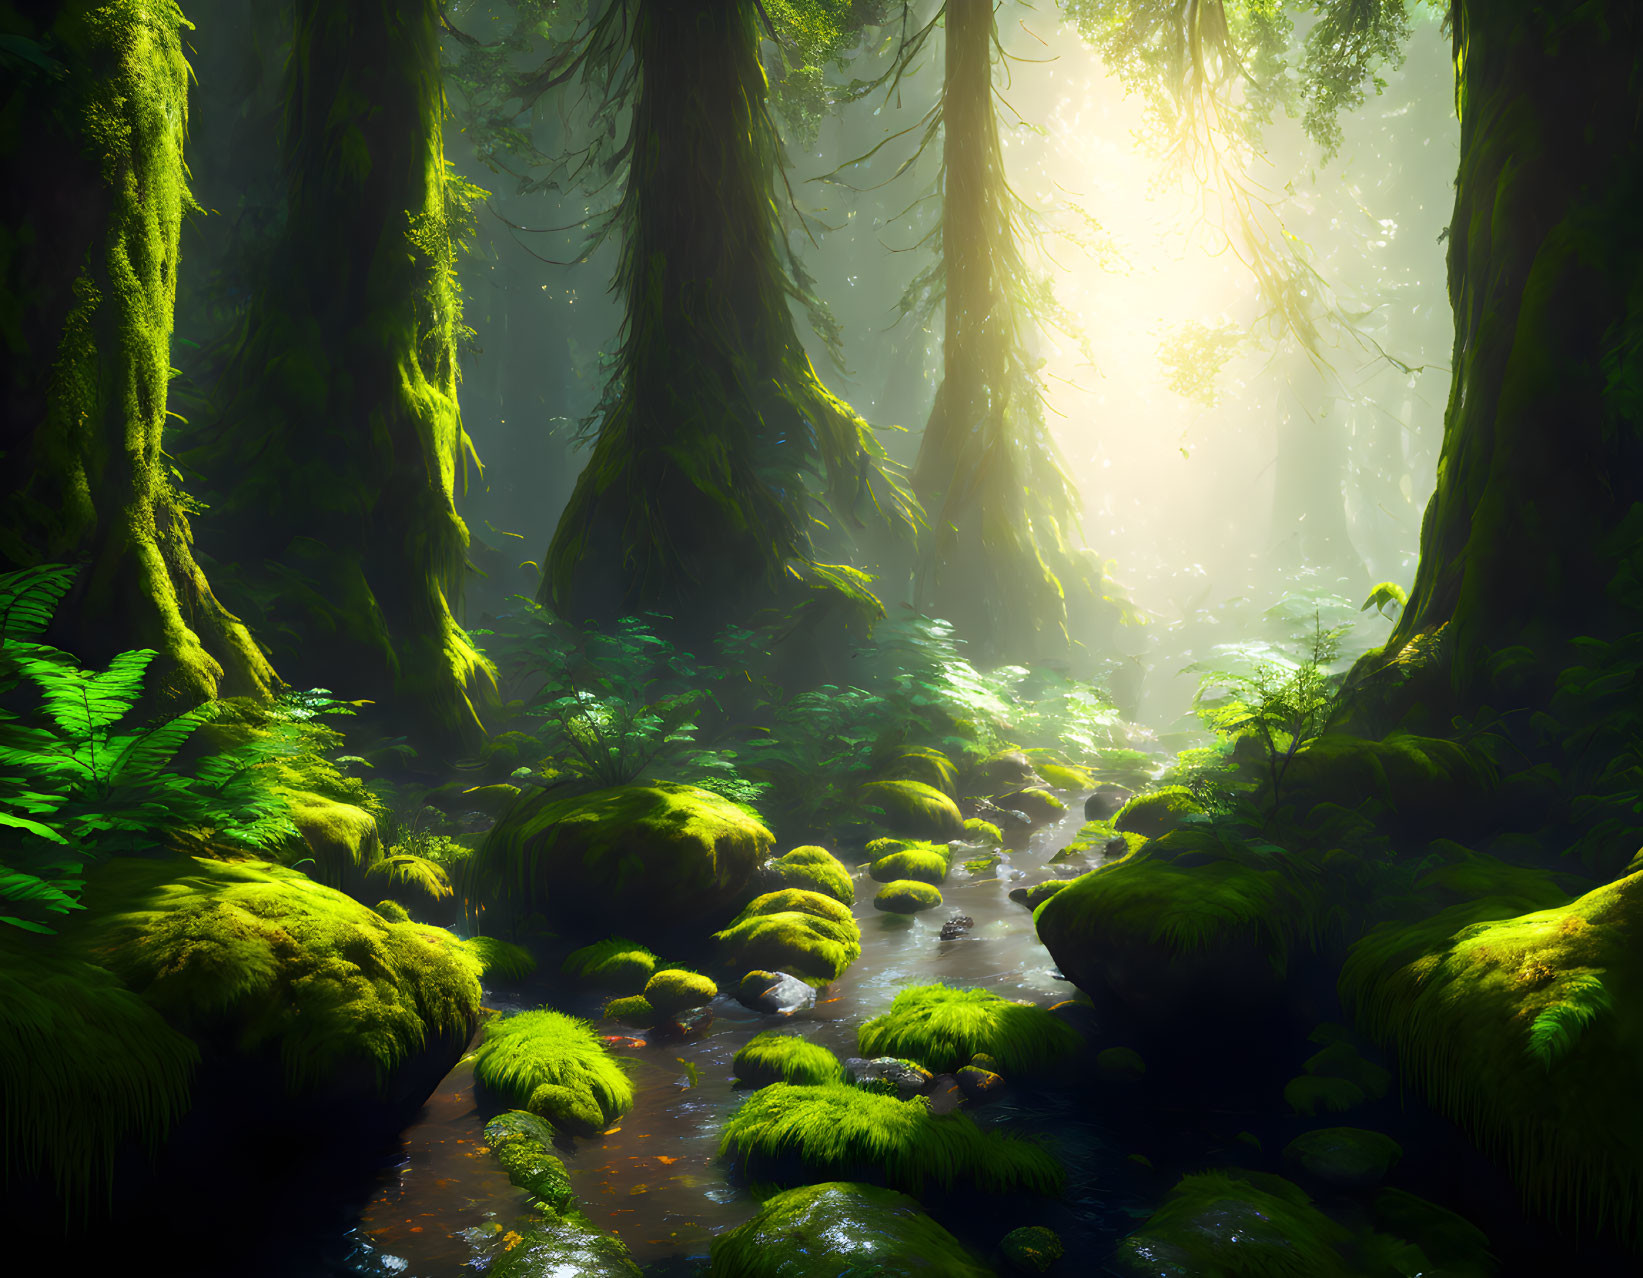 A Mossy Forest